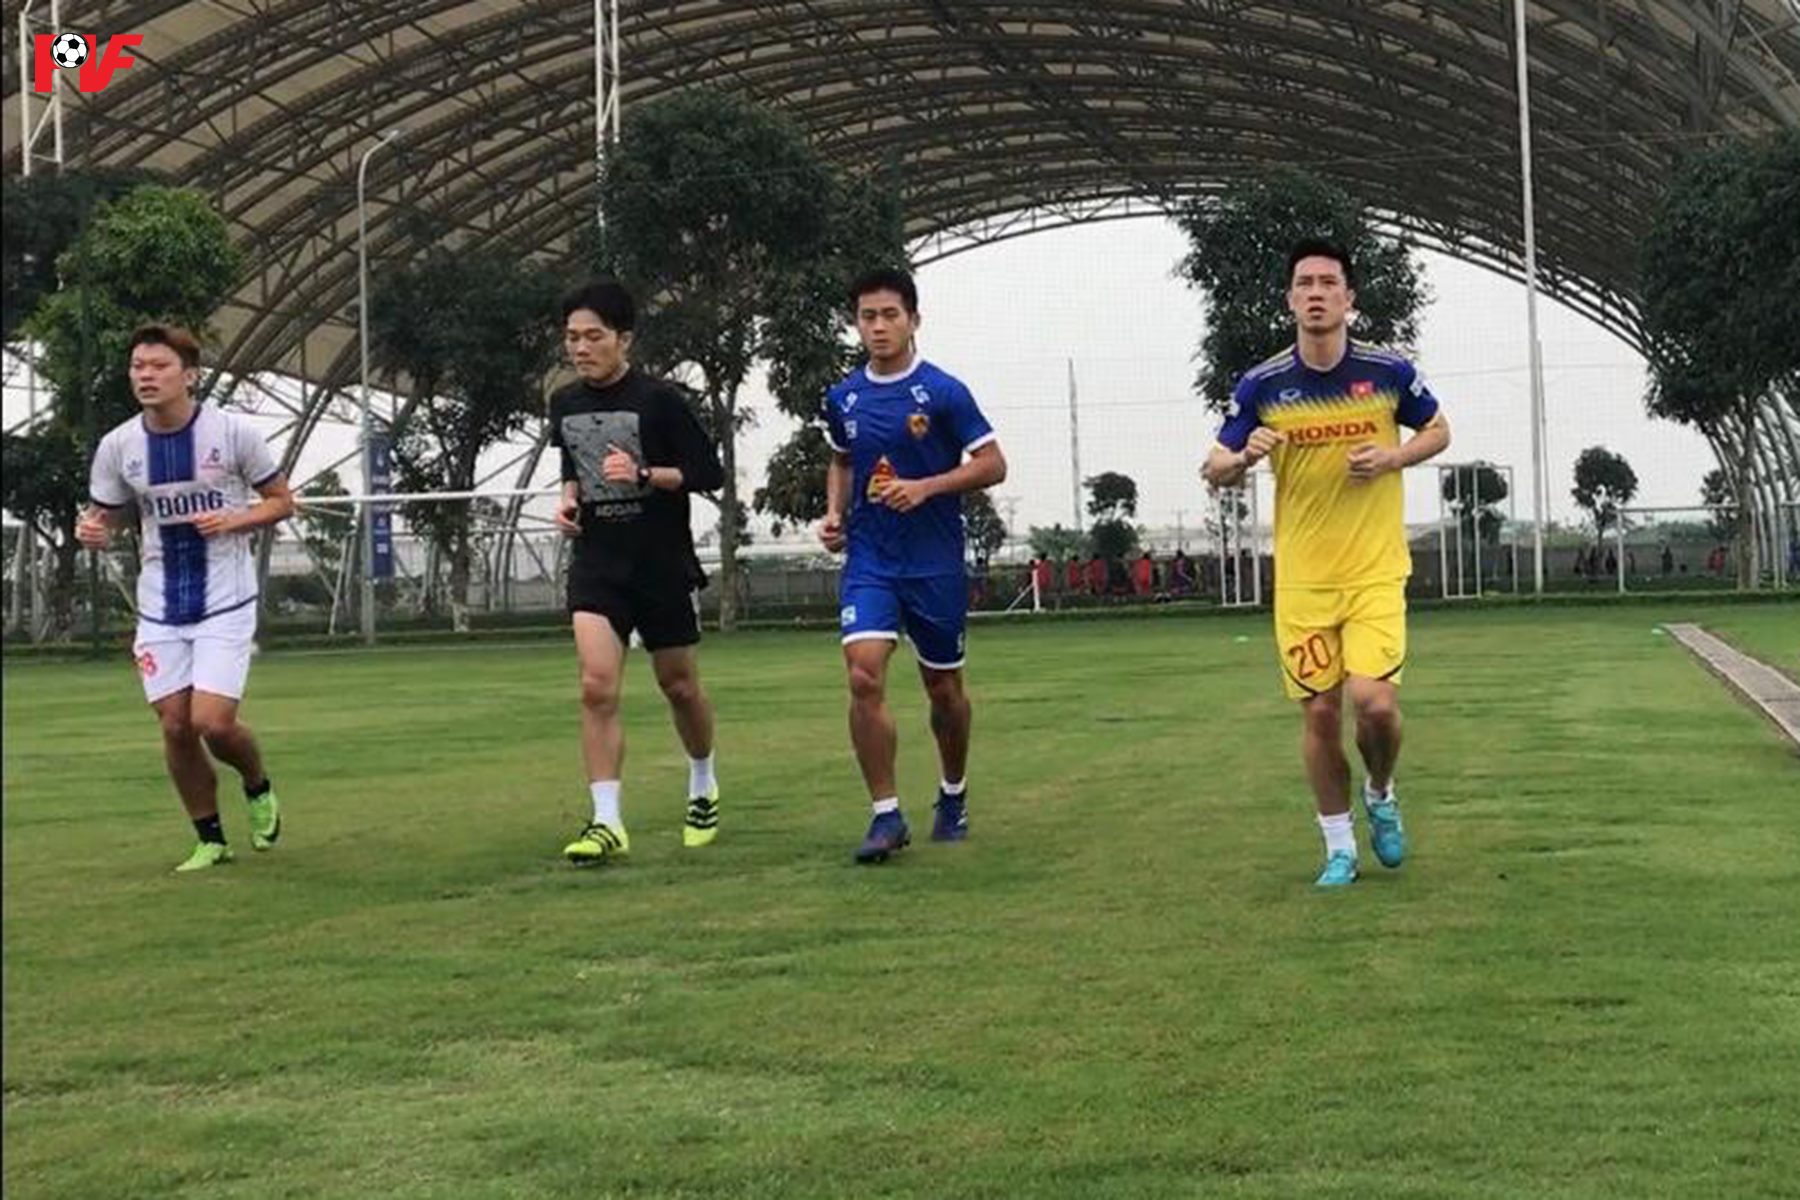 The players were able to run on the grass (photo: PVF)